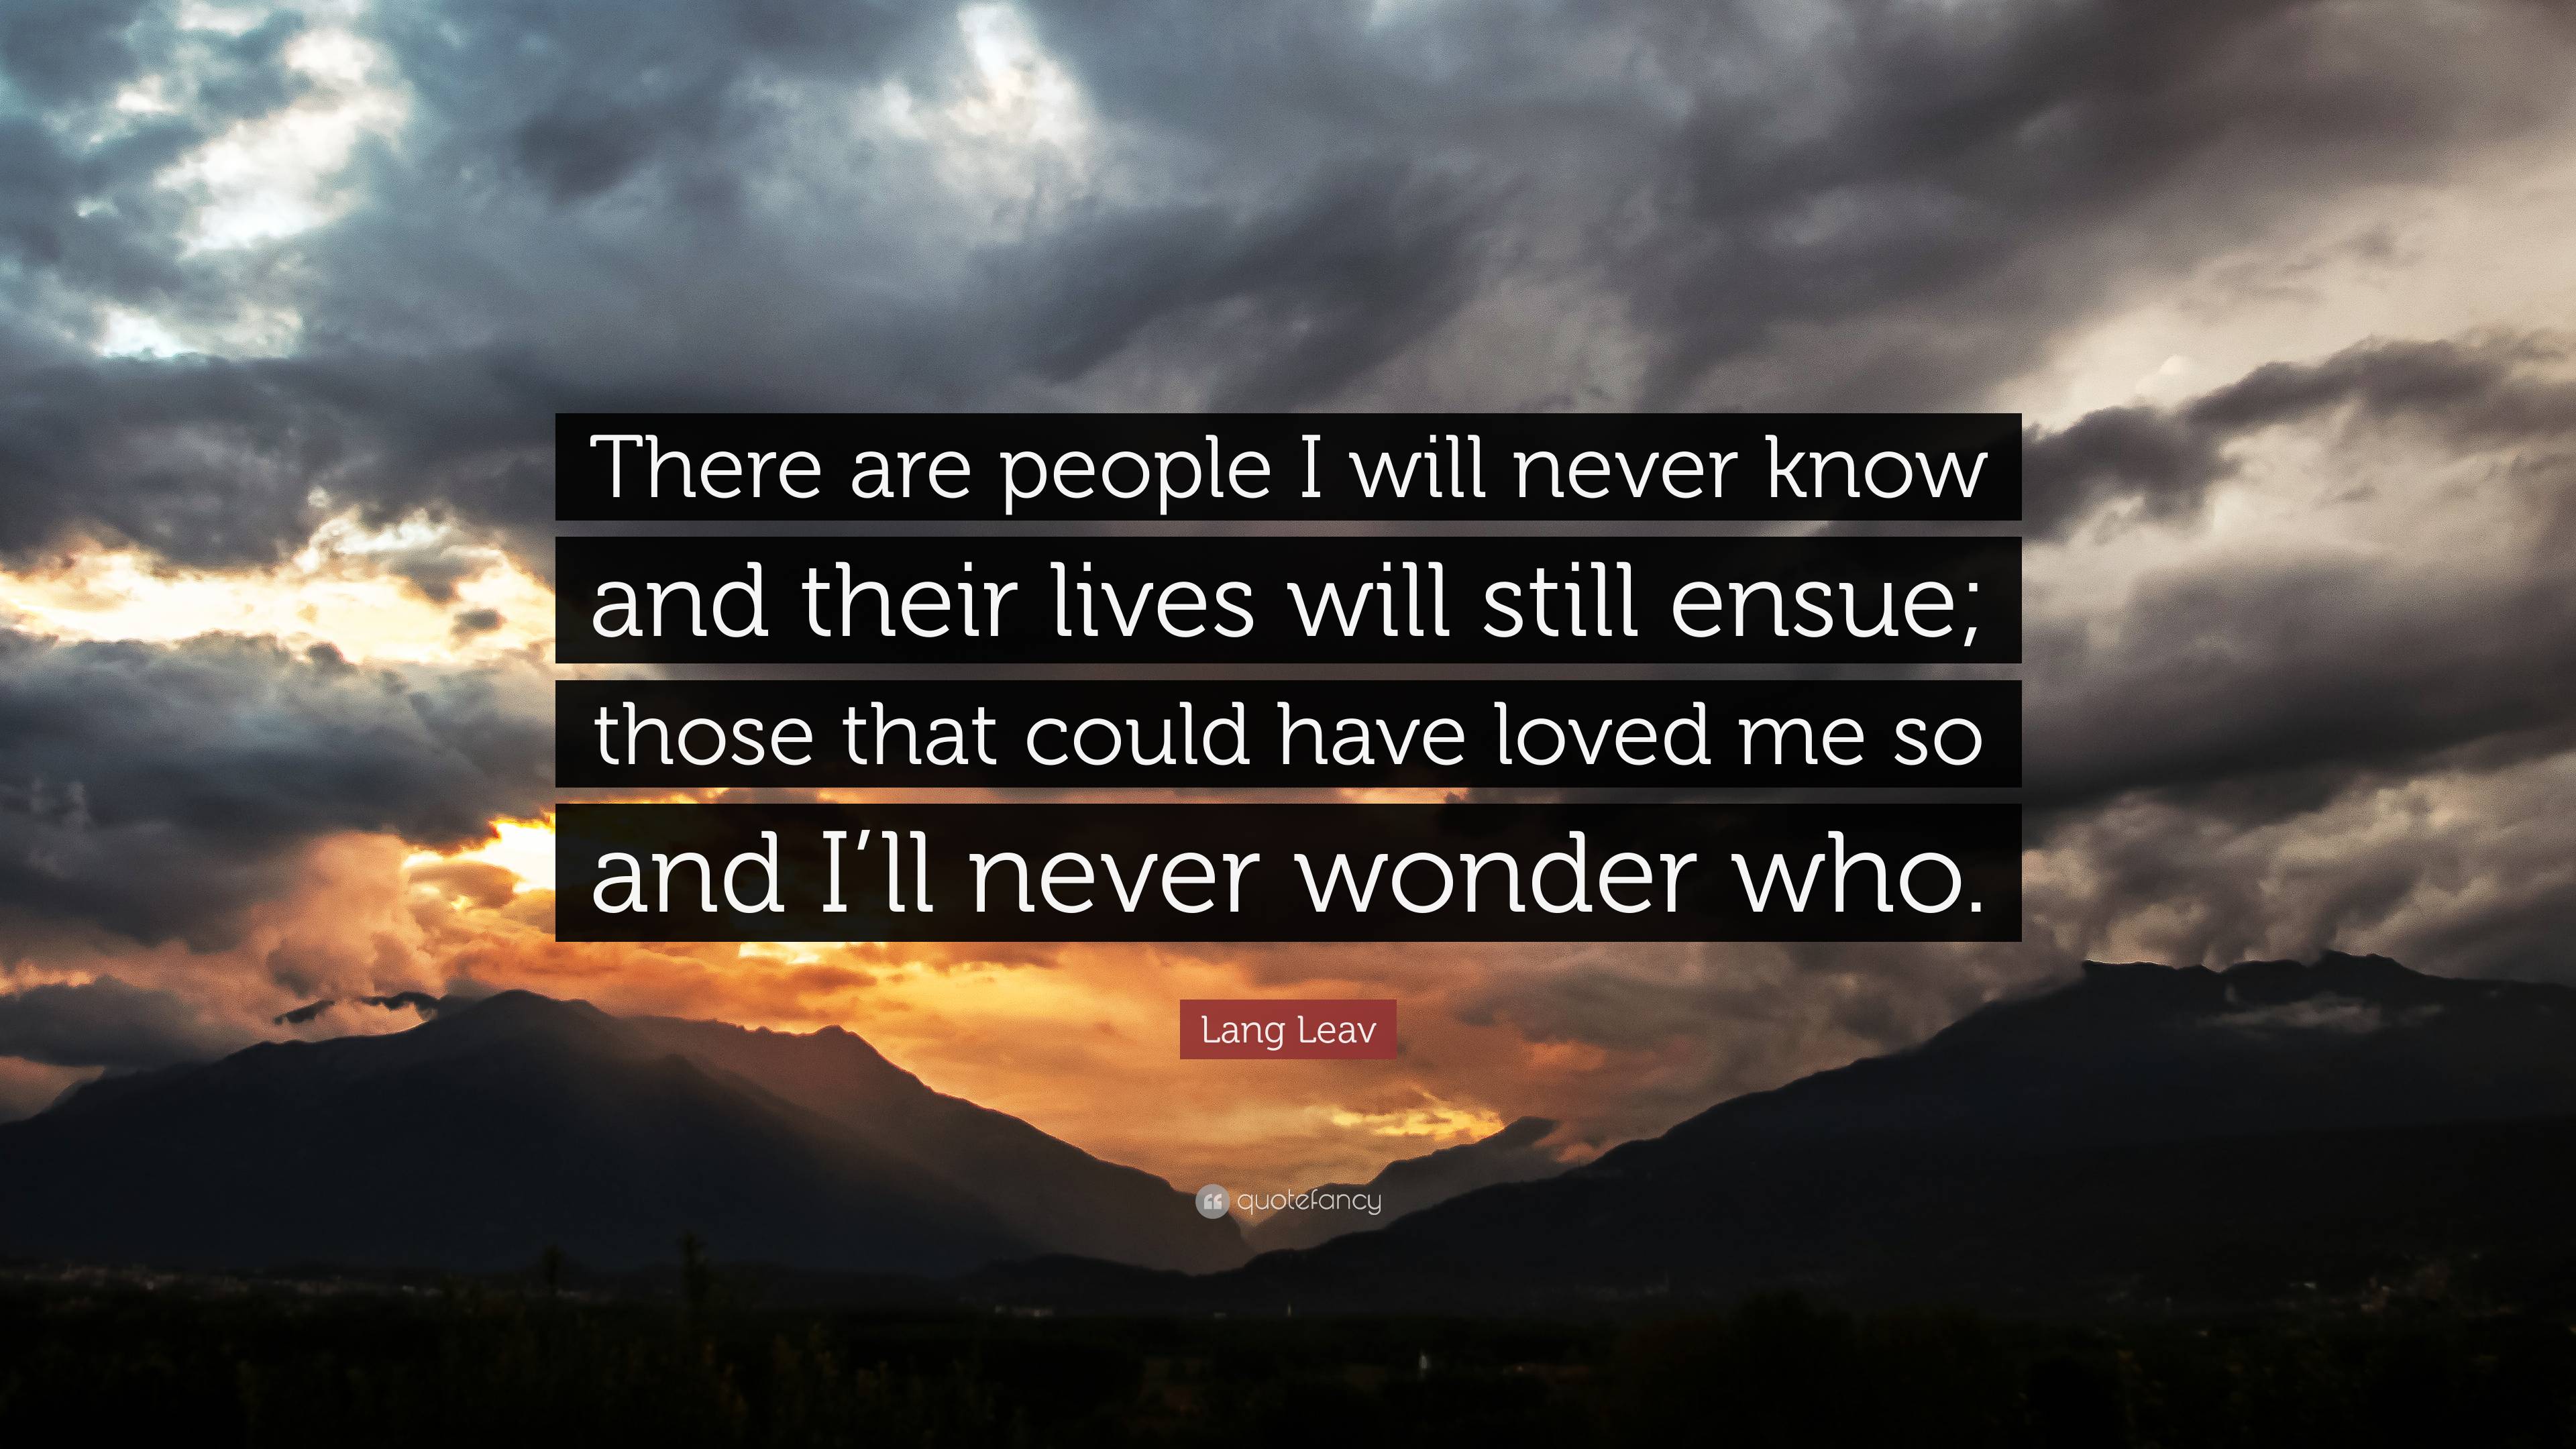 Lang Leav Quote: “There are people I will never know and their lives ...